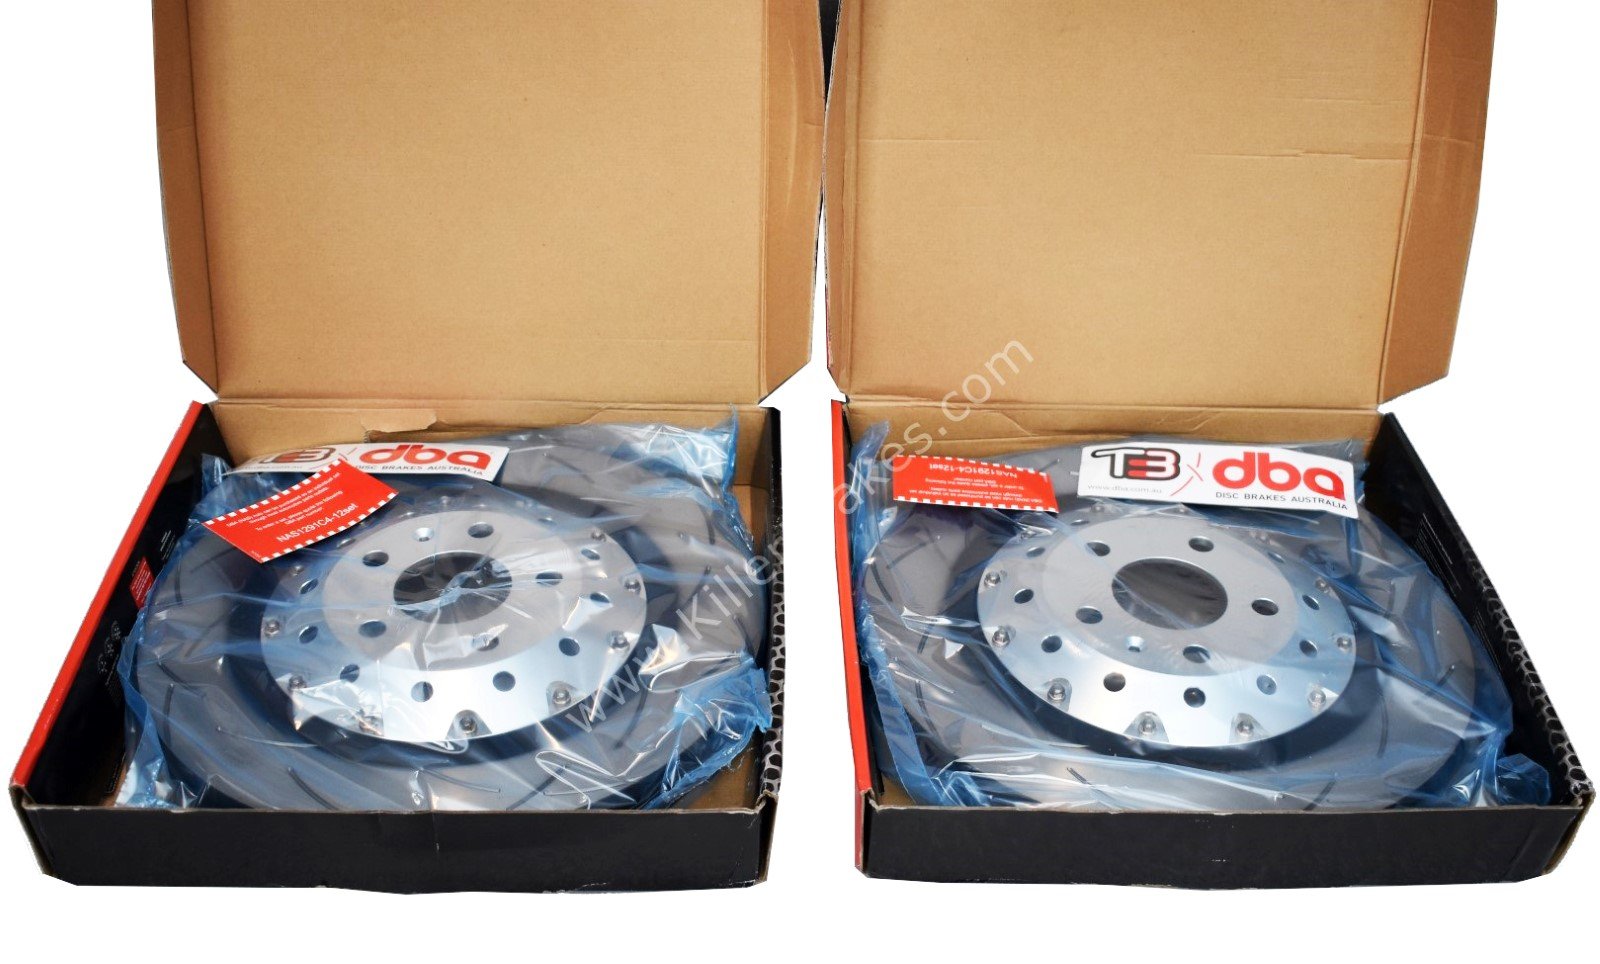 Front Audi Rs4 RS5 R8 DBA52834SLVS Brake Discs 365x34mm 2-Piece Anodised